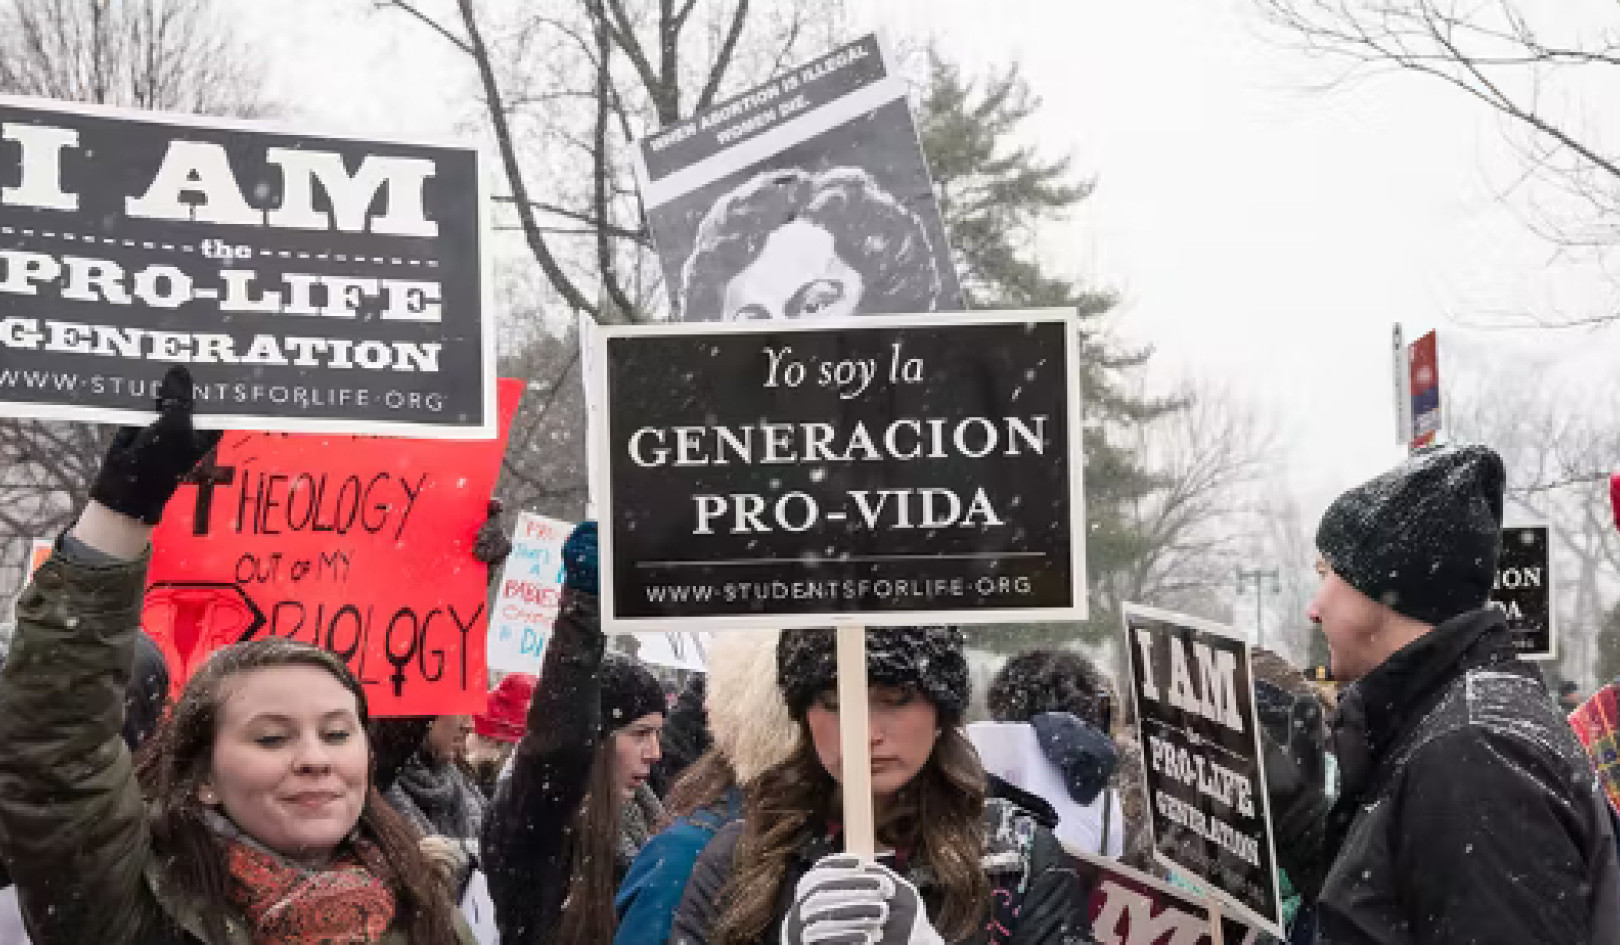 What Really Drives Anti-abortion Beliefs?